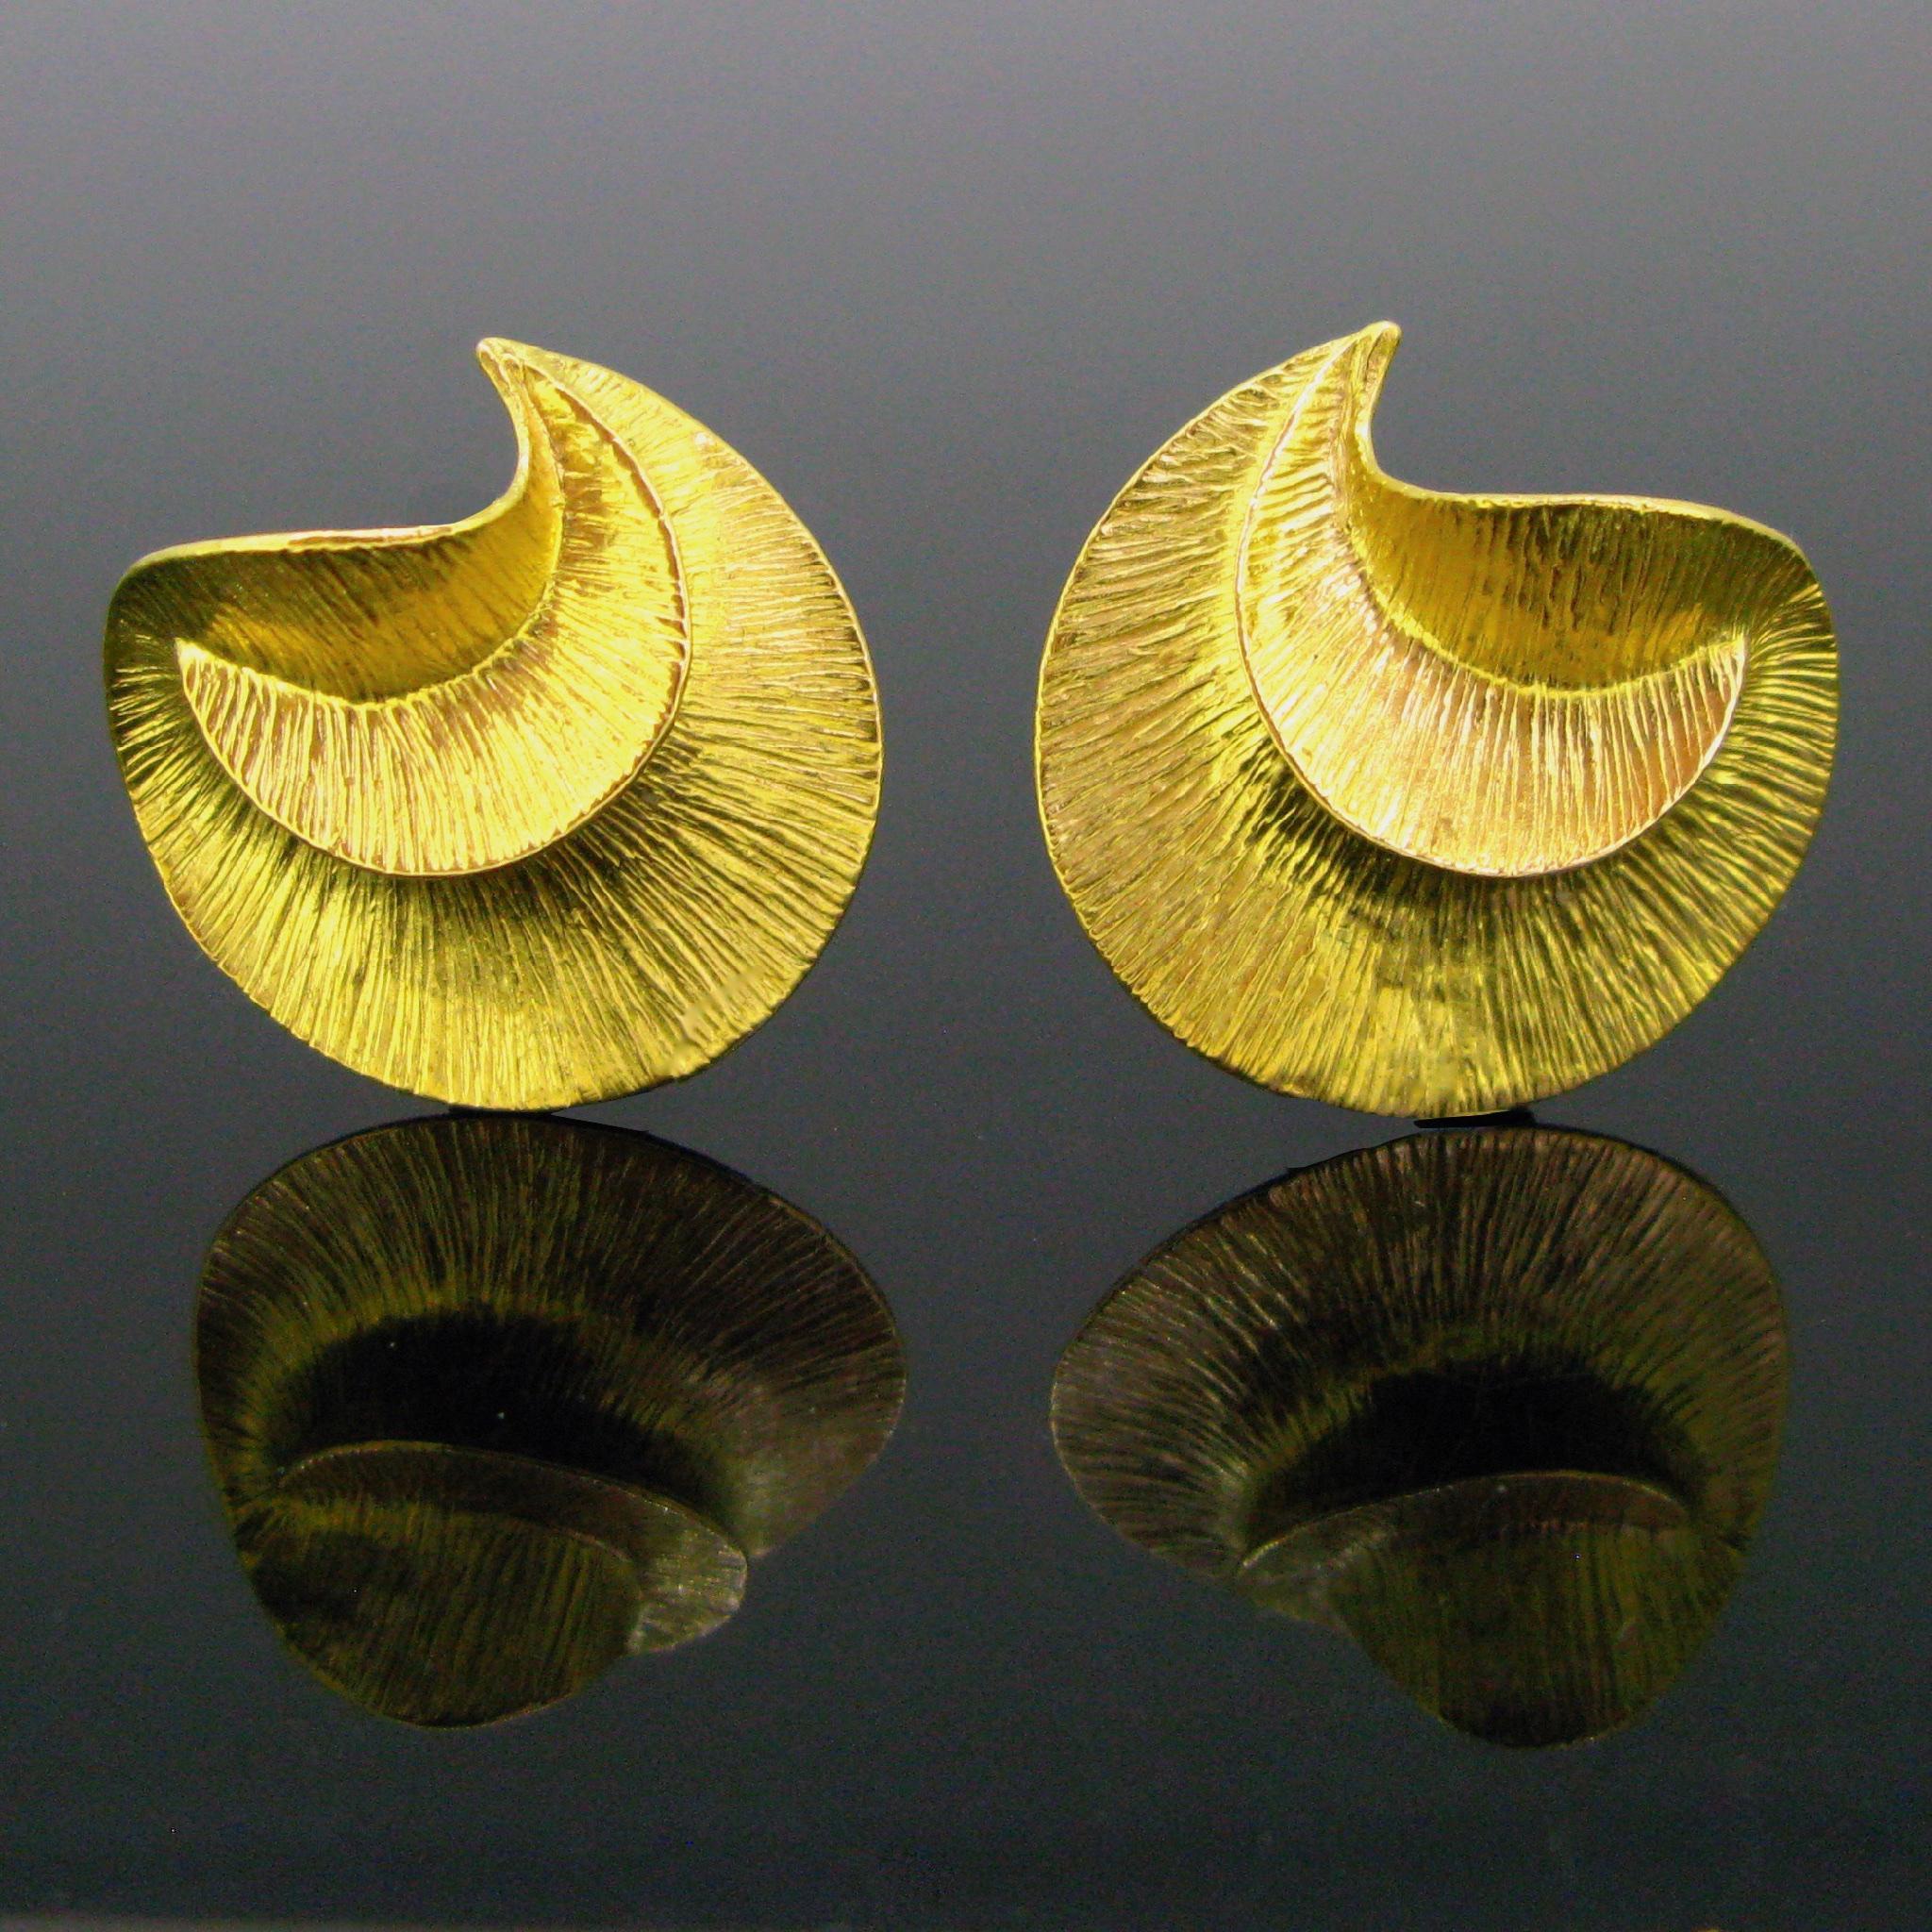 Weight:	17,07gr


Metal:	18kt yellow gold 


Condition:	Very Good


Signature:	URART


Comments:	This beautiful pair of studs earrings has a very nice swirl design. The gold is brushed and shiny. They are fully made in 18kt yellow gold. It is signed